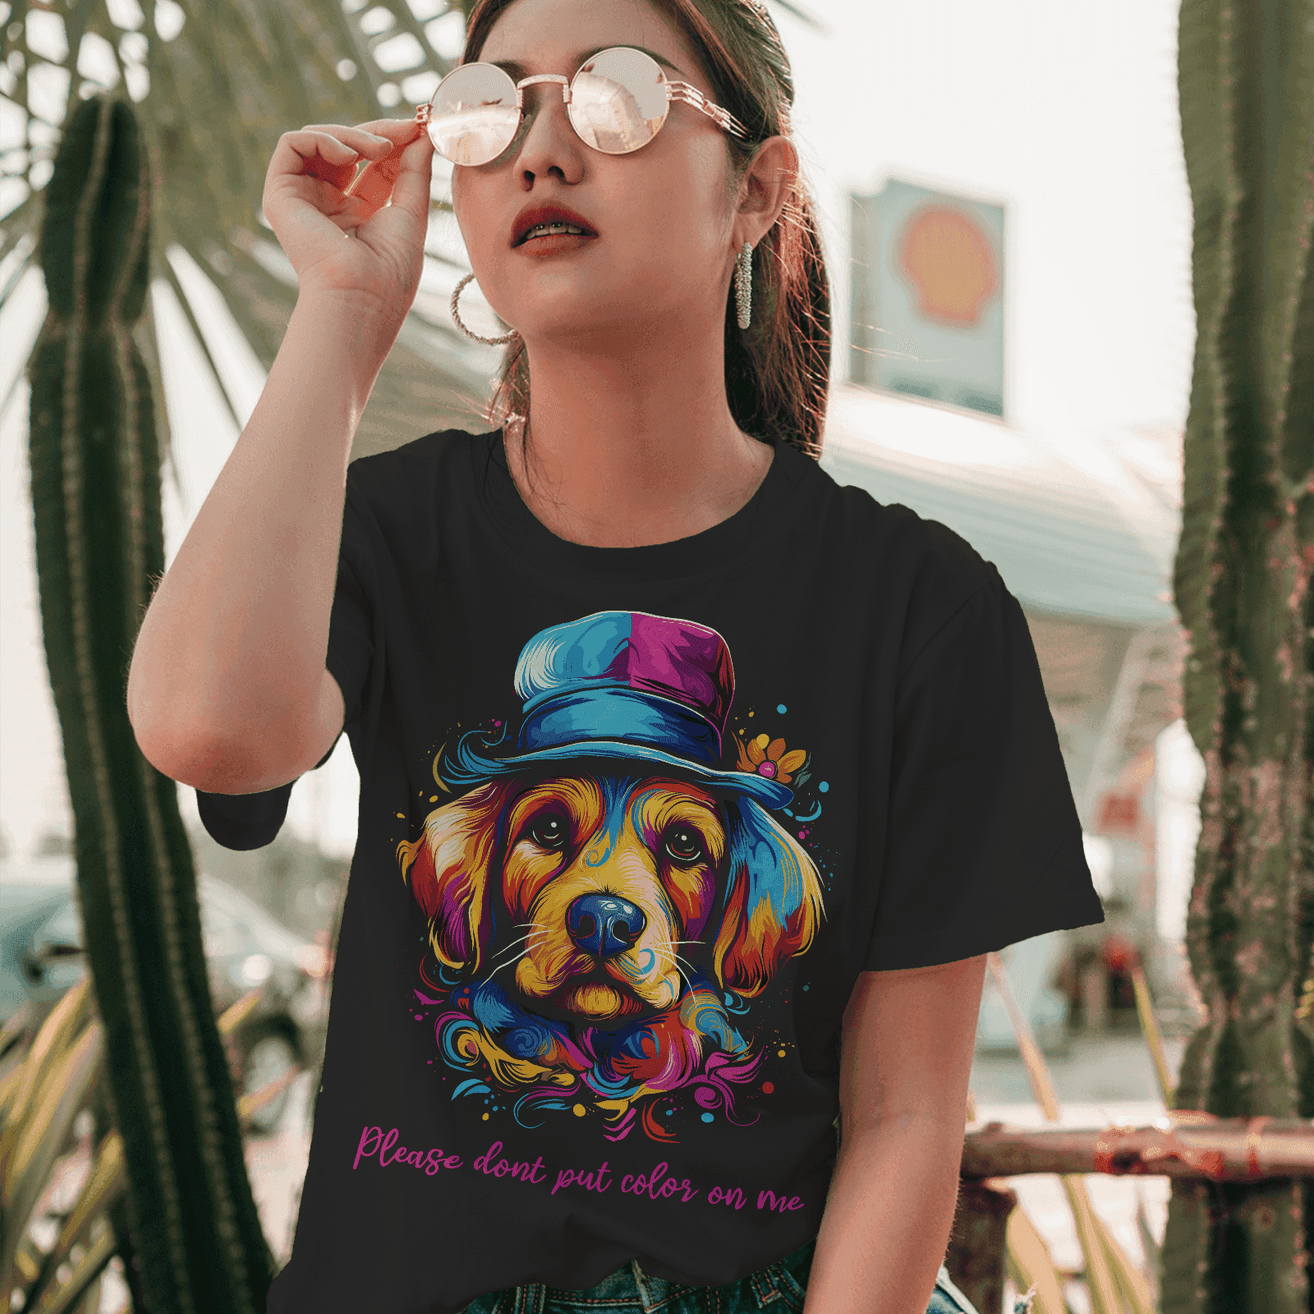 Colorful Paws Women's Holi Special T-Shirt - Please Don't Put Color on Me